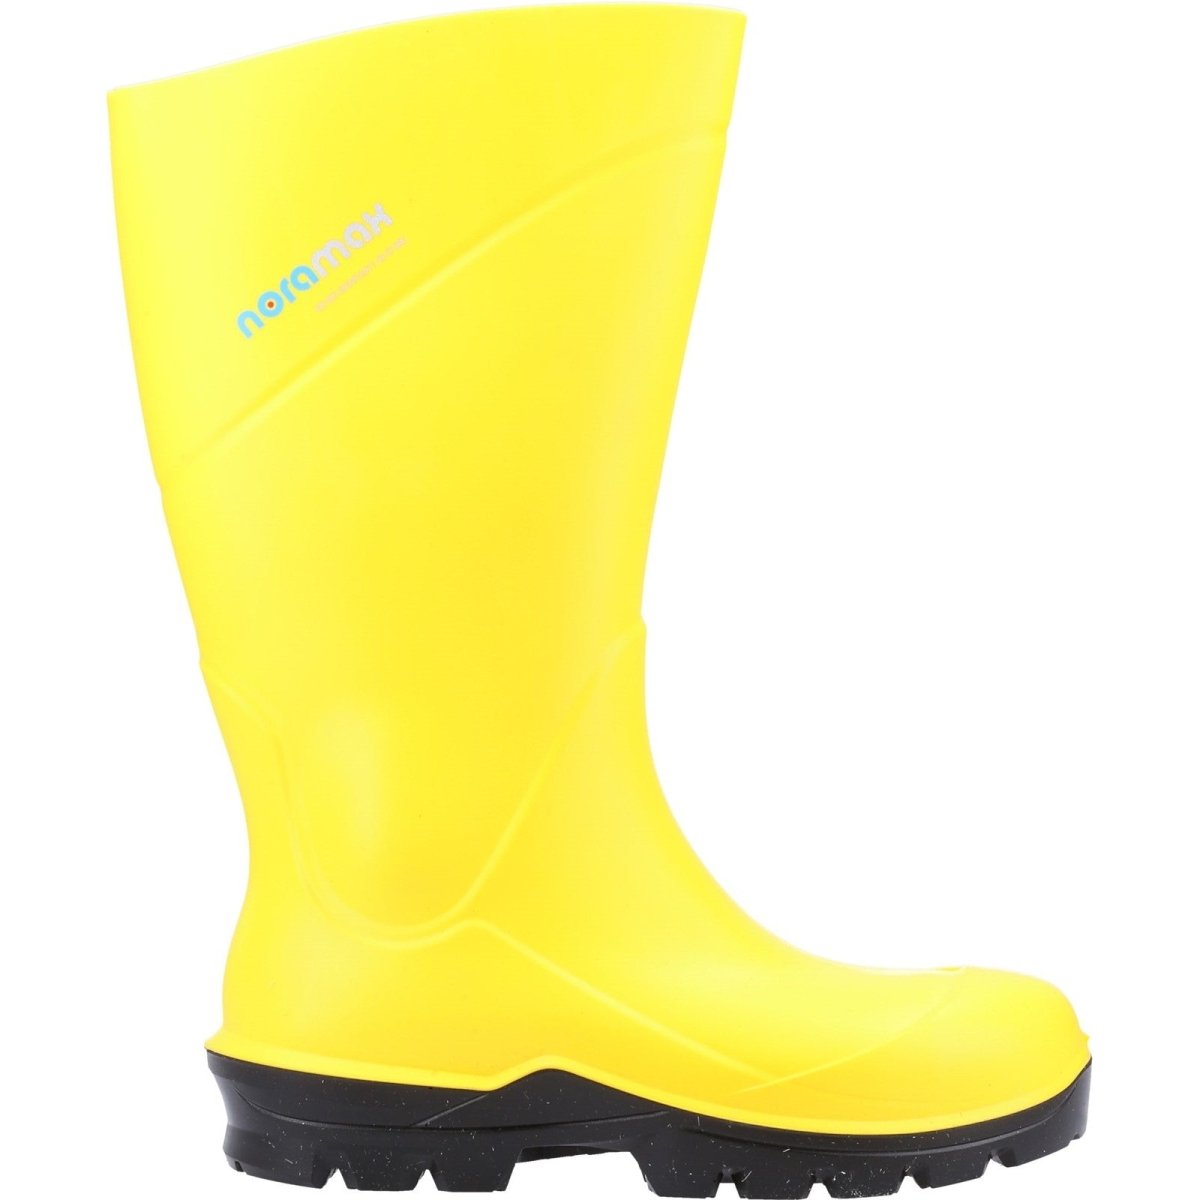 Nora Noramax Pro S5 Full Safety Polyurethane Boot - Shoe Store Direct